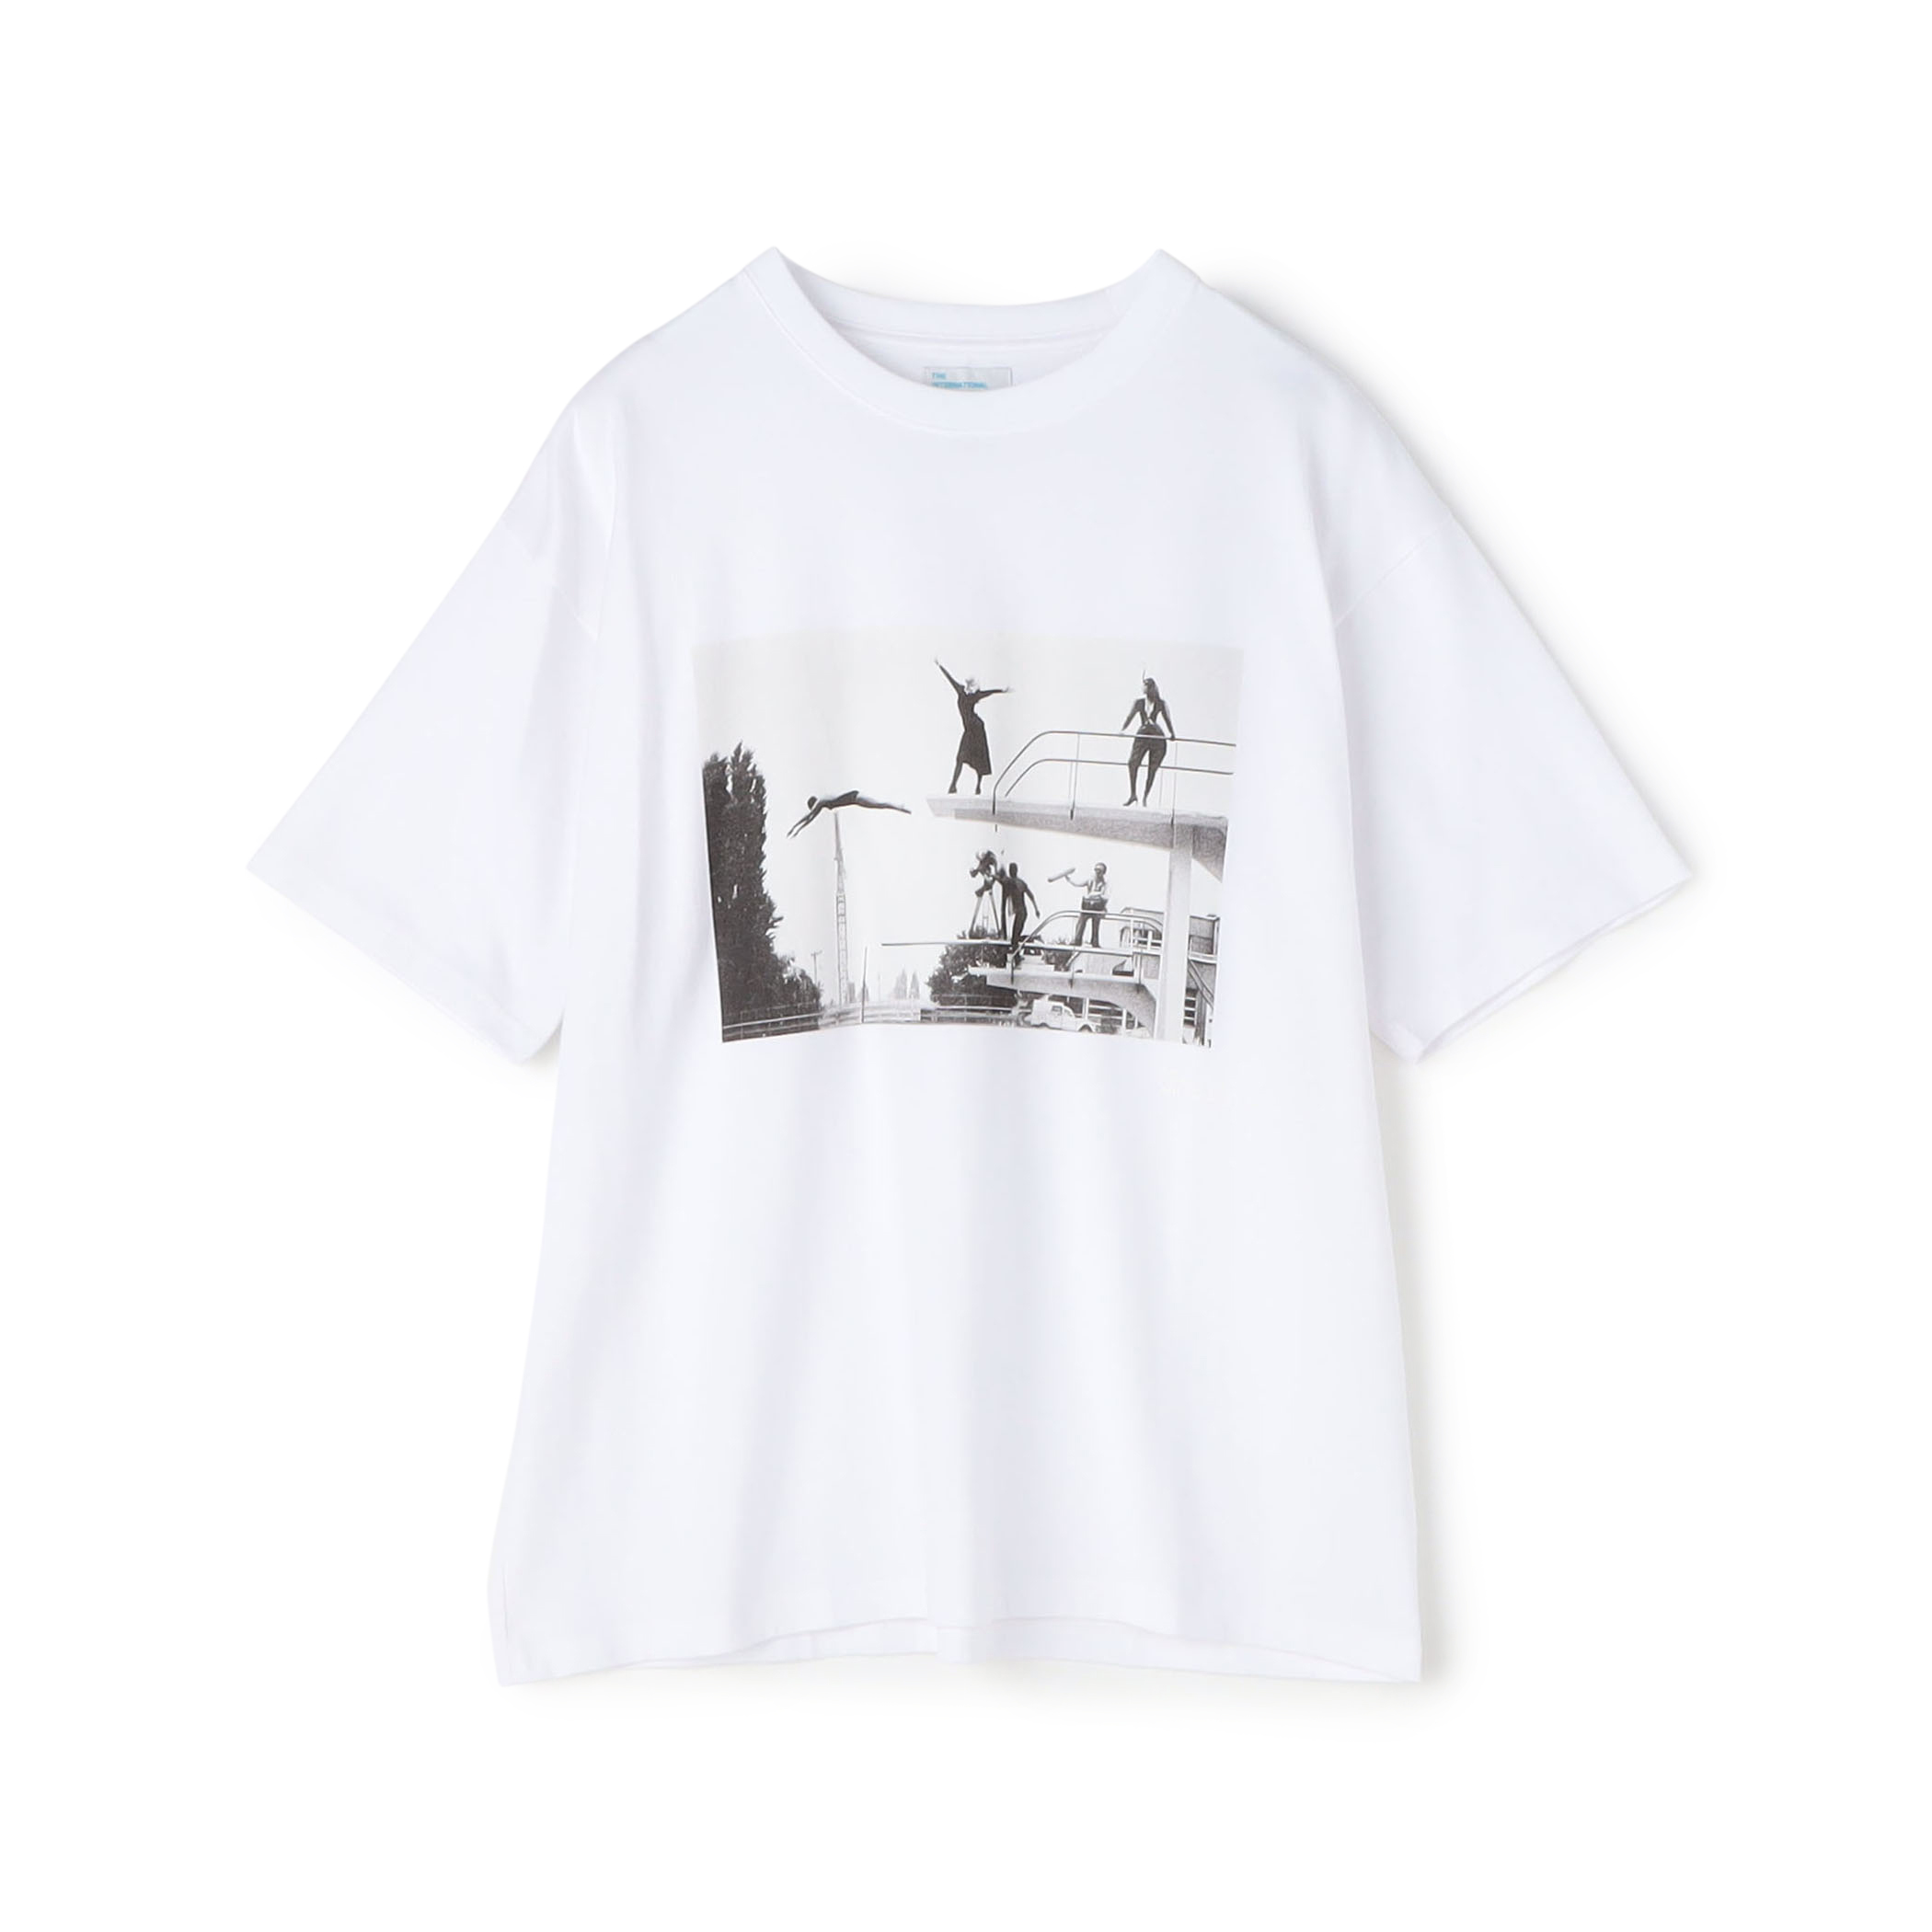 THE INTERNATIONAL IMAGES COLLECTION プリントTシャツ｜トゥモローランド 公式通販